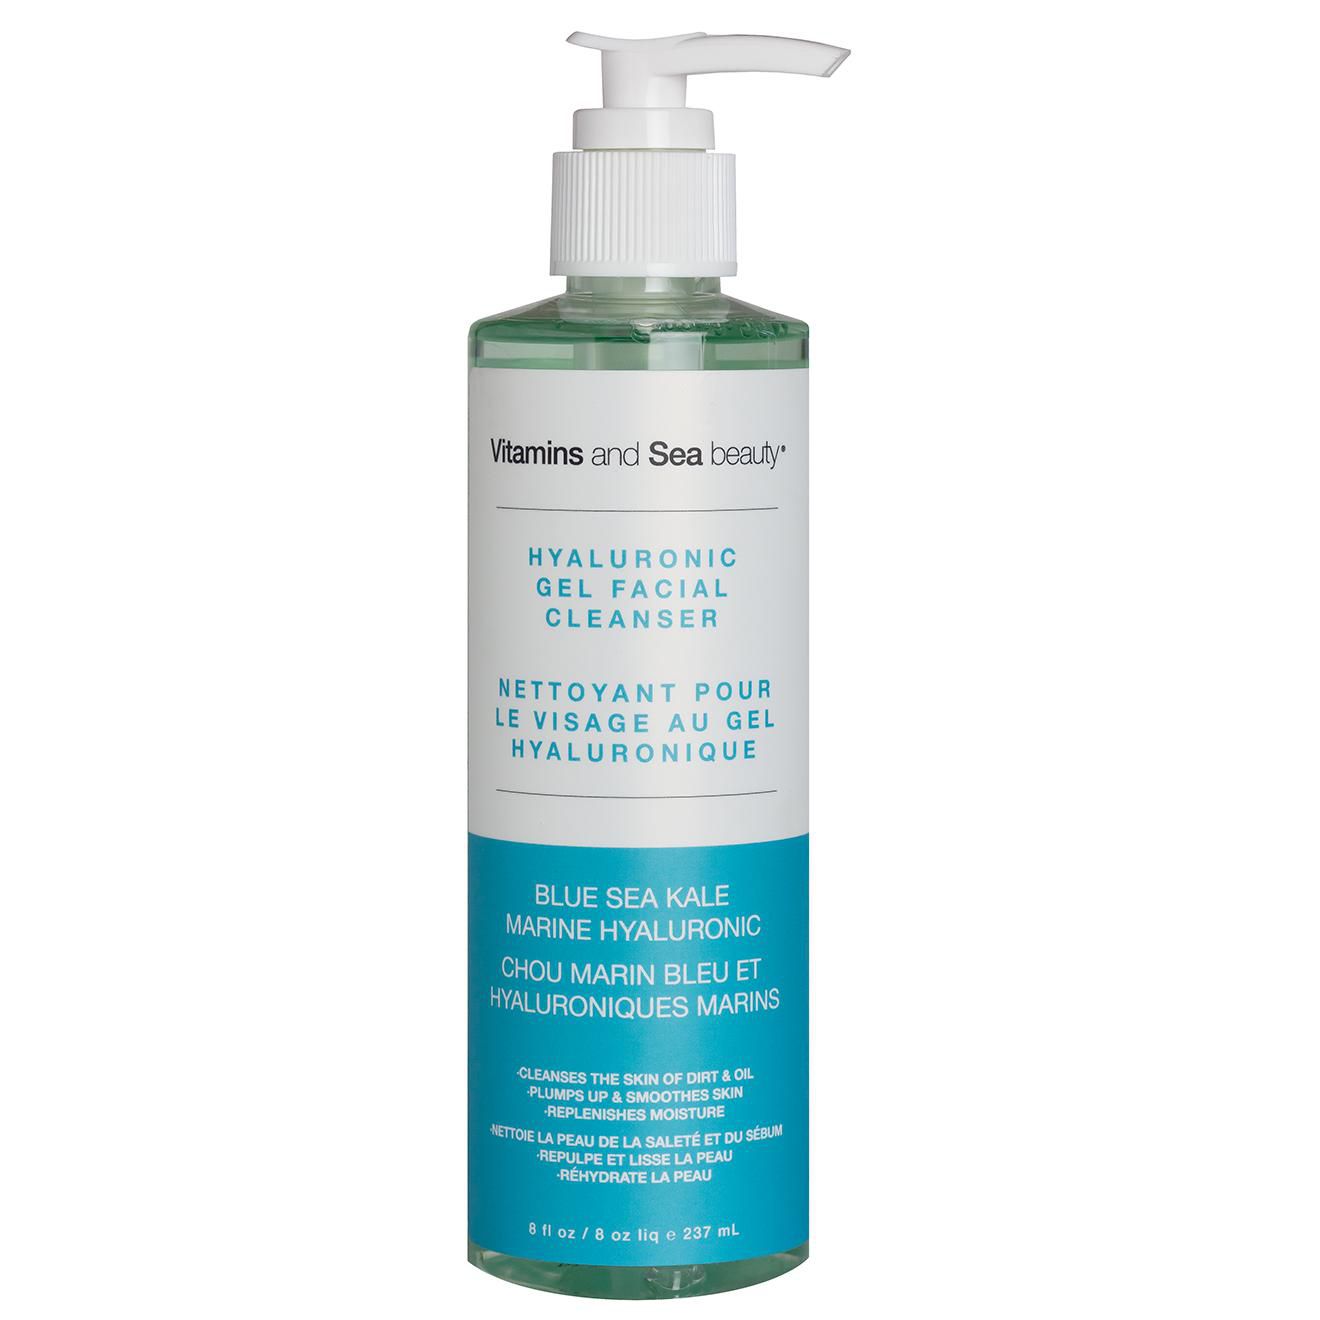 Spectro Facial Cleanser for Blemish Prone Skin, Fragrance and Dye